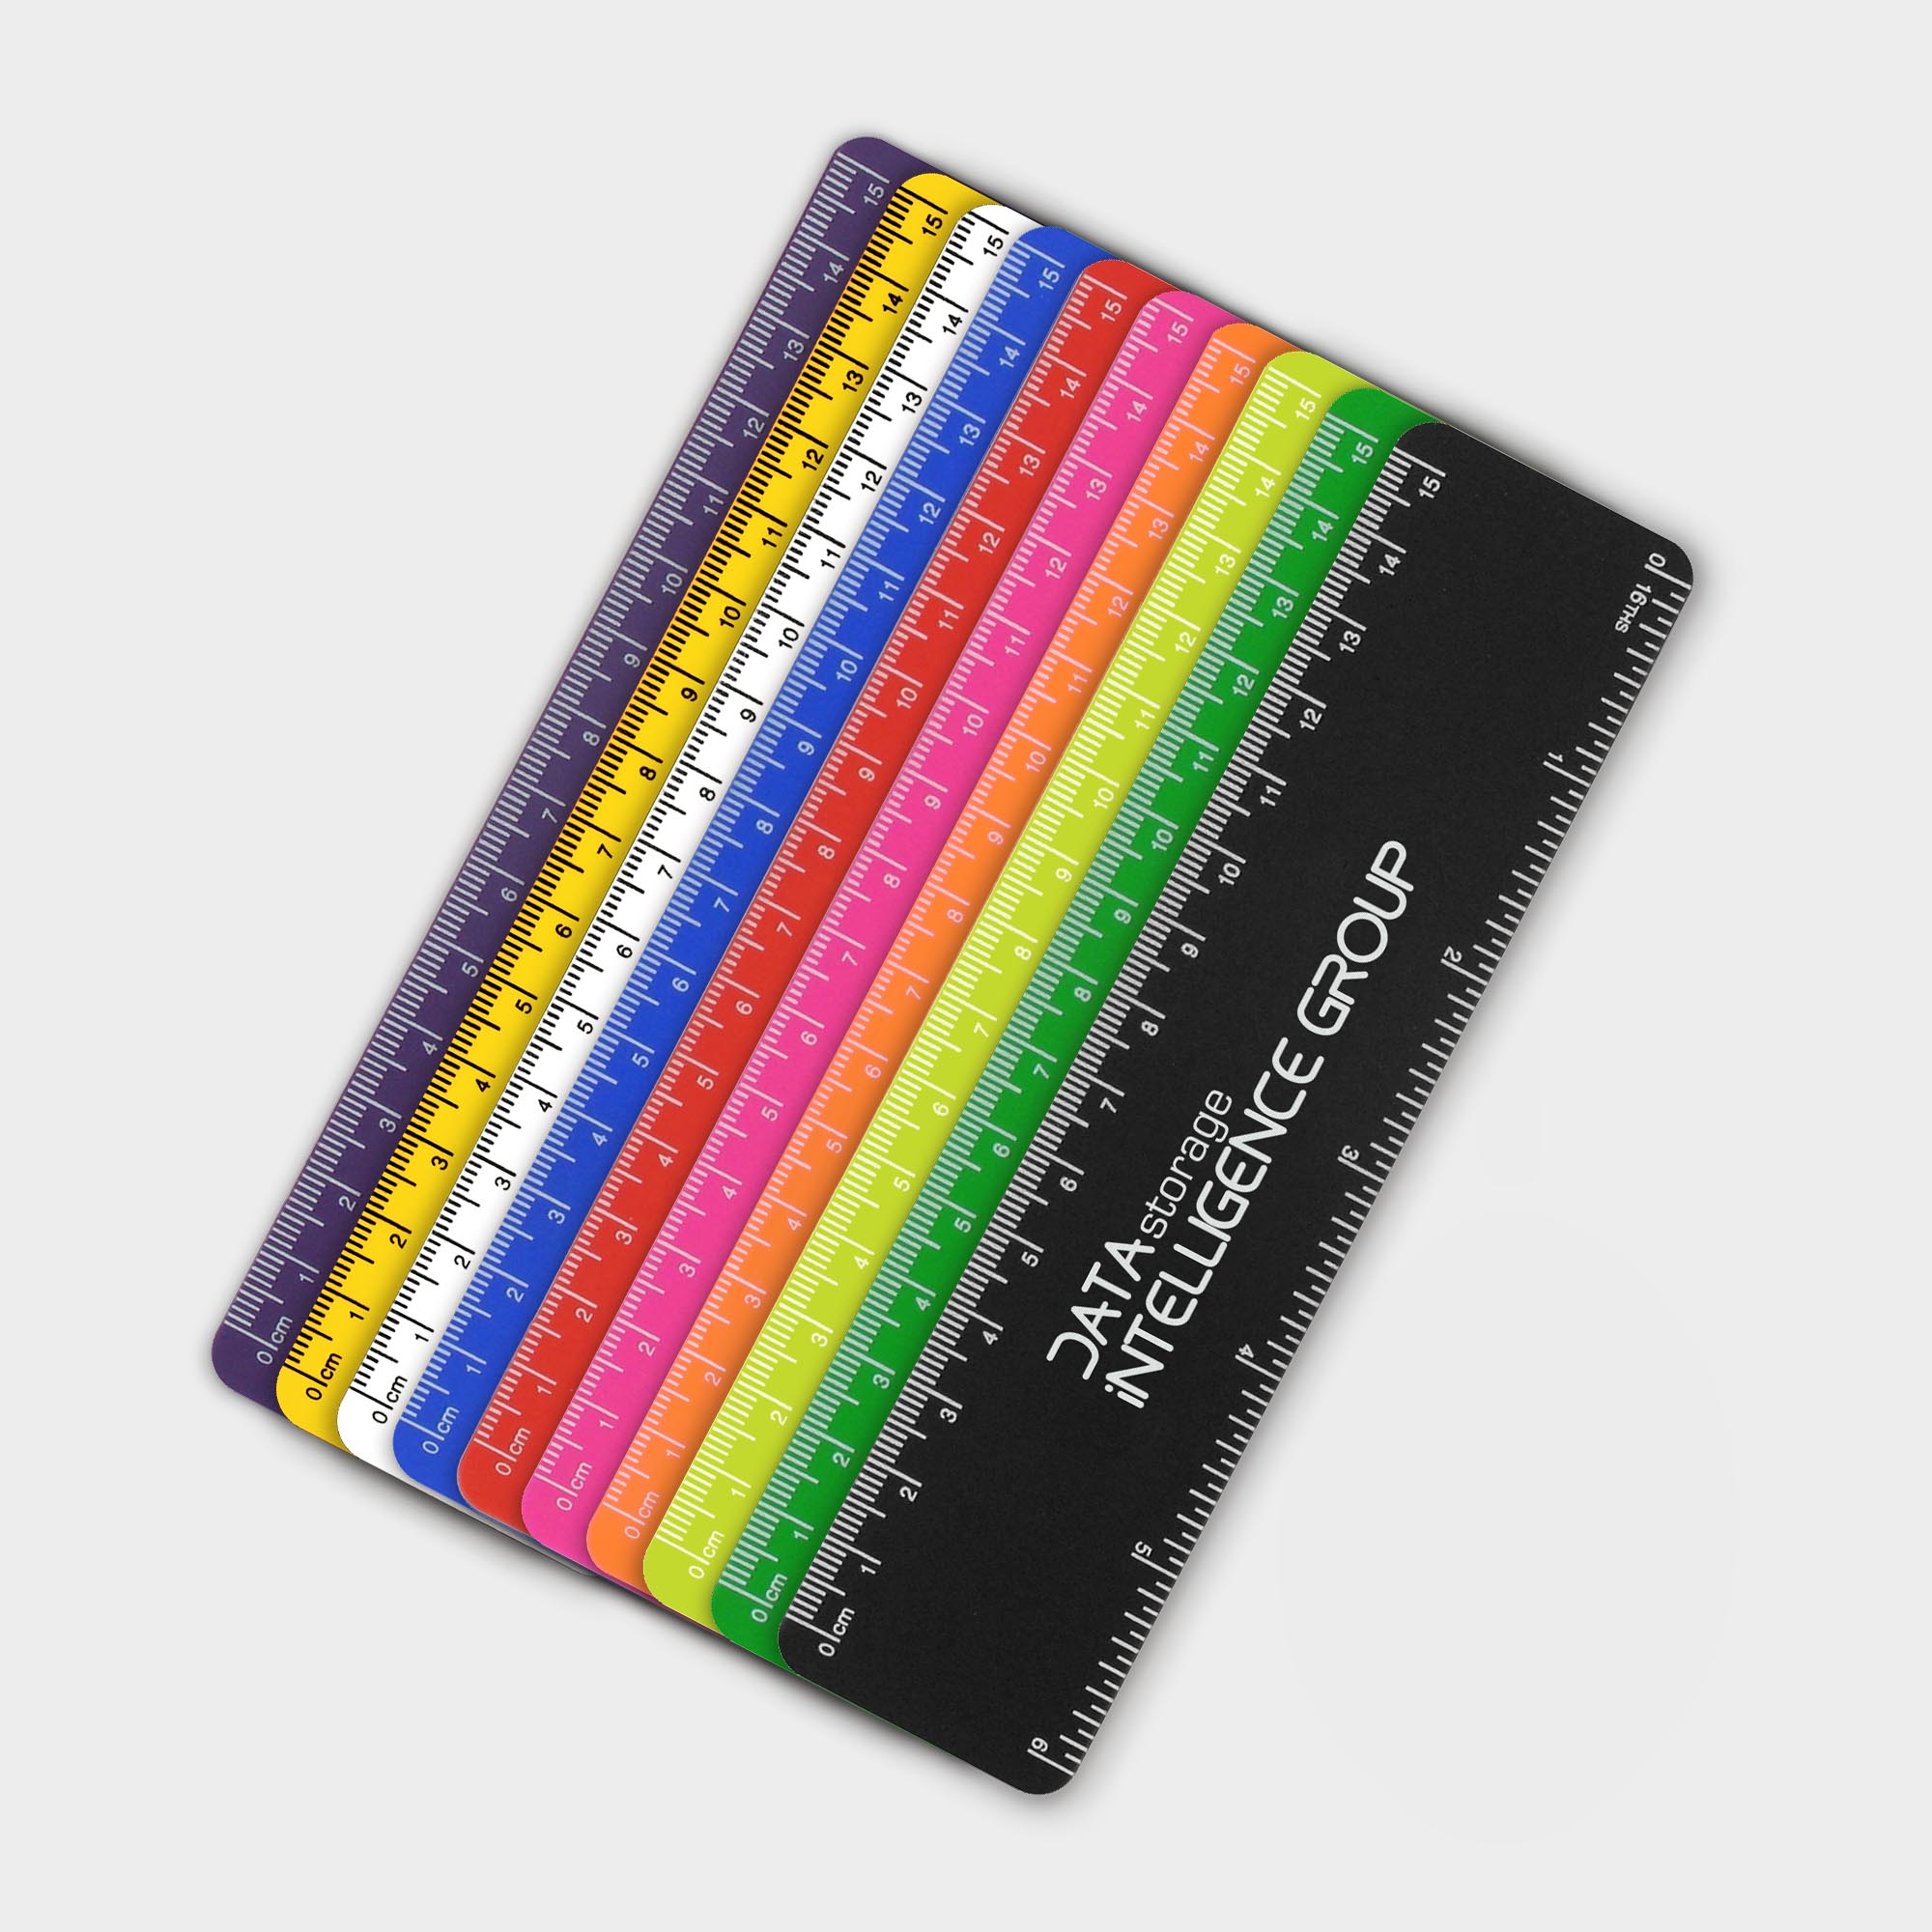 The Green & Good 15cm Flexi Ruler is made from recycled polypropylene. Made in the UK, it is very thin and light, perfect for mailers and as a give-away. Available in a selection of colours. 1 colour print only.